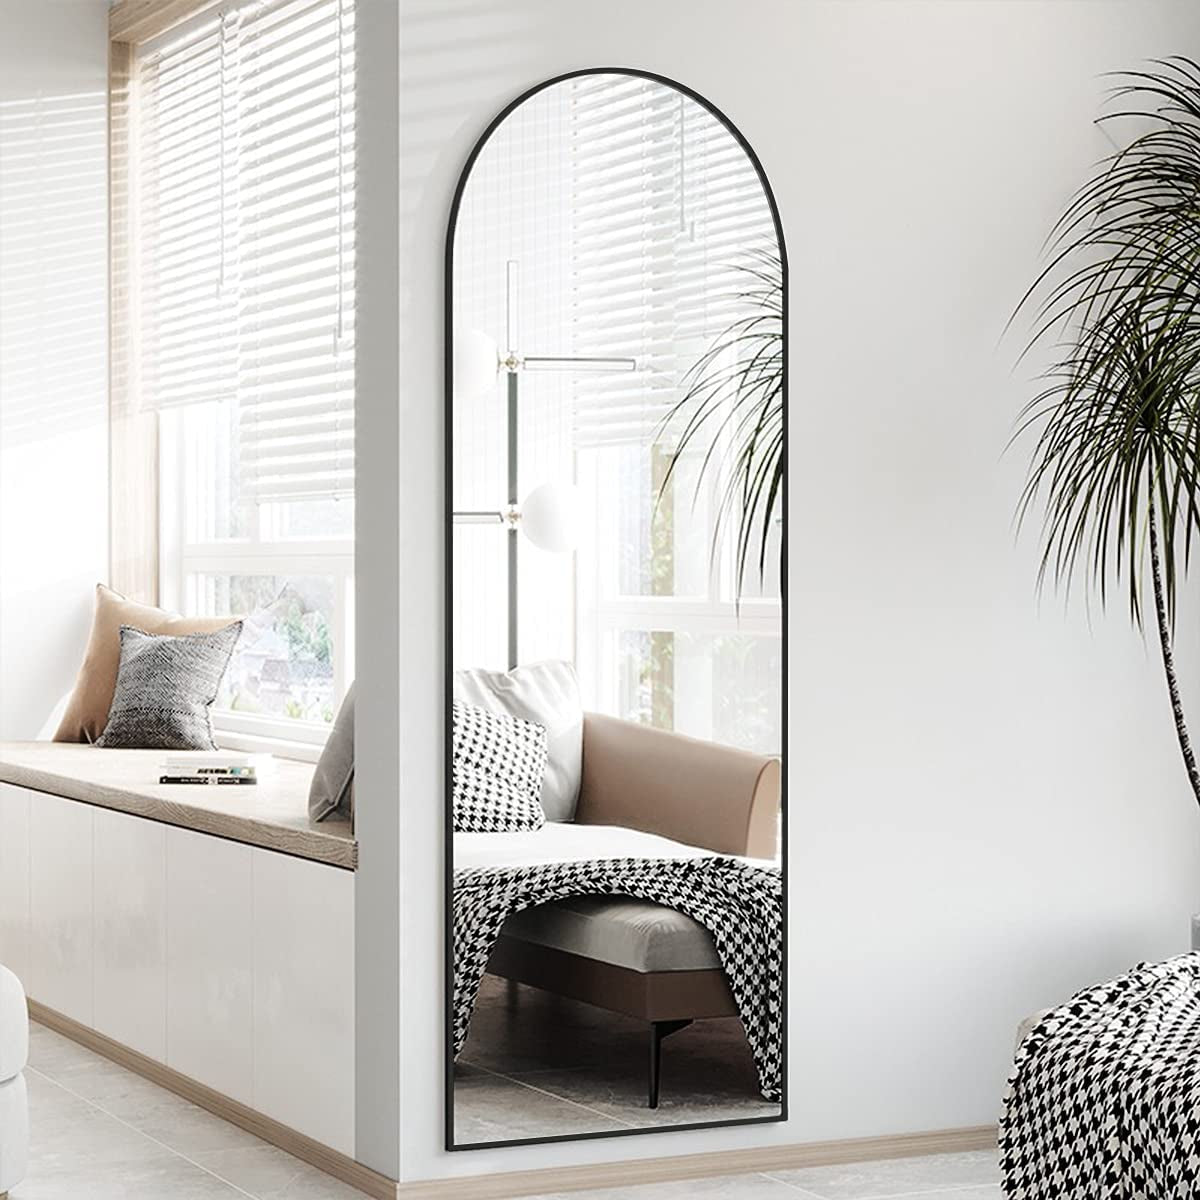 Full Length Mirror, Floor Mirror Full Length, 65"X22" Arched-Top Mirror Hanging or Leaning, Standing Mirror, Body Mirror, Wall Mounted Mirror with Aluminum Frame for Bedroom Living Room (Black)